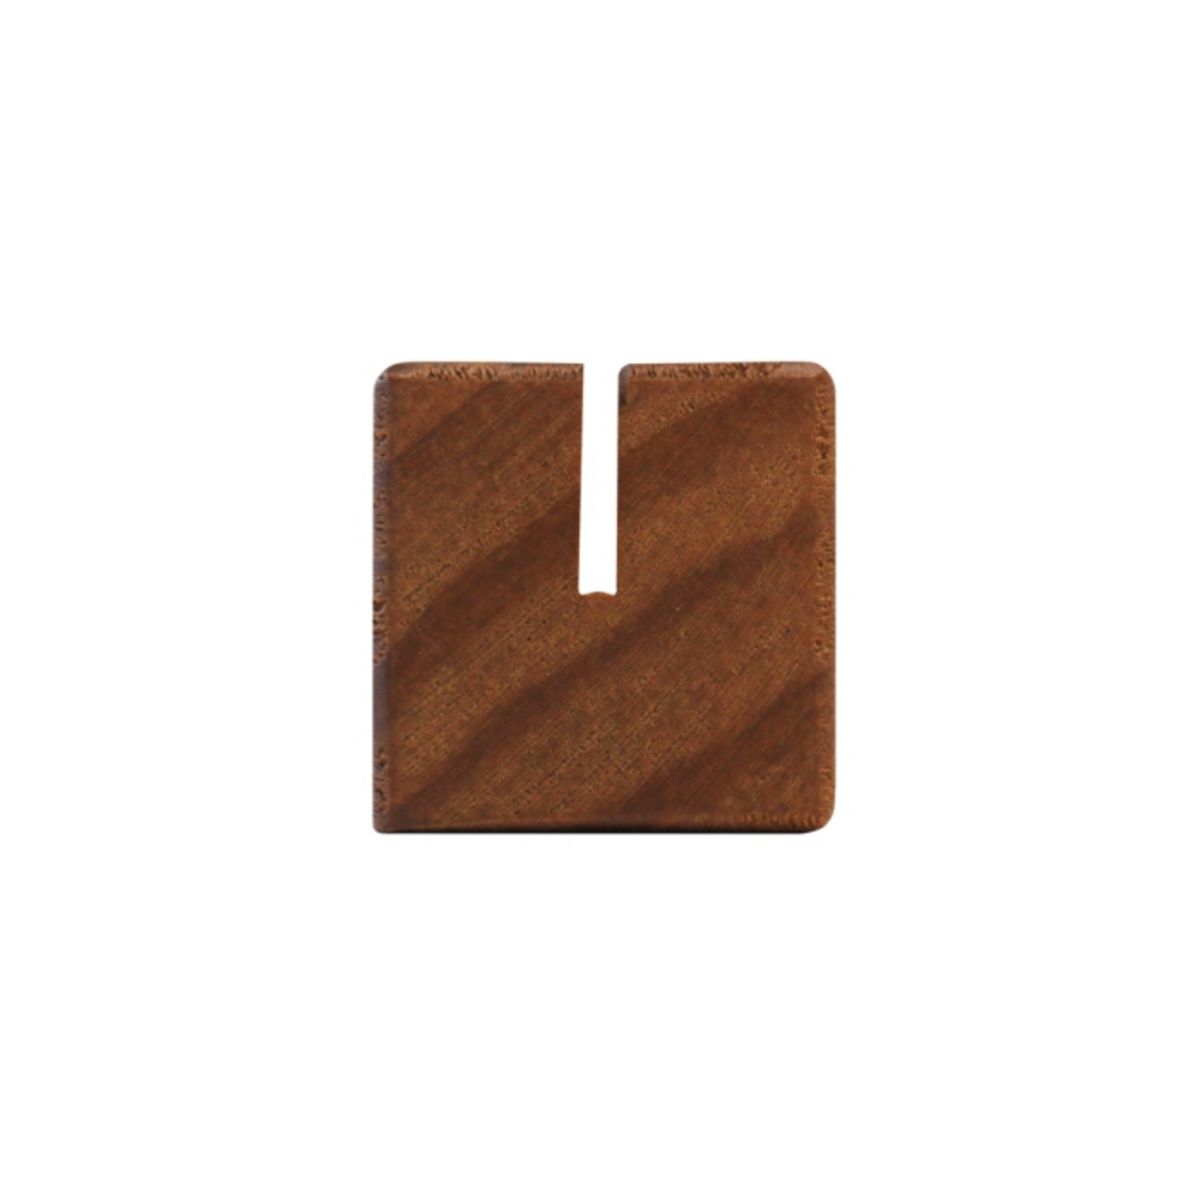 Wood base card holder - profile view.png